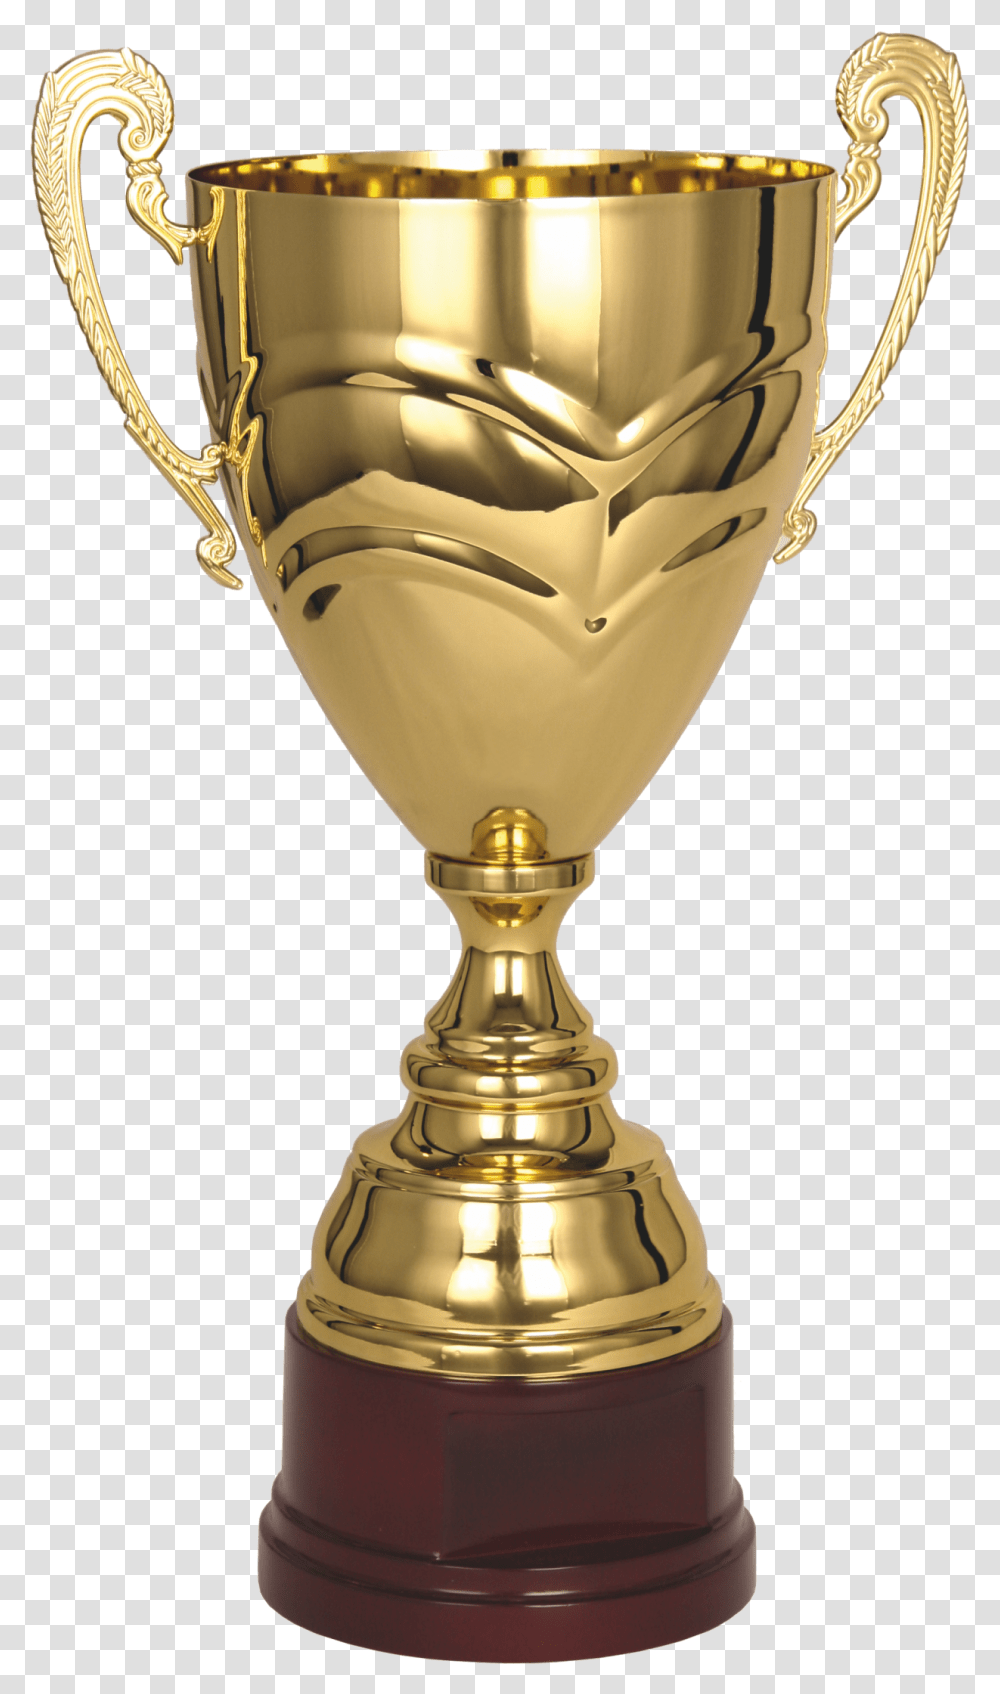 Golden Cup Image Gold Trophy Hd, Lamp, Mixer, Appliance Transparent Png